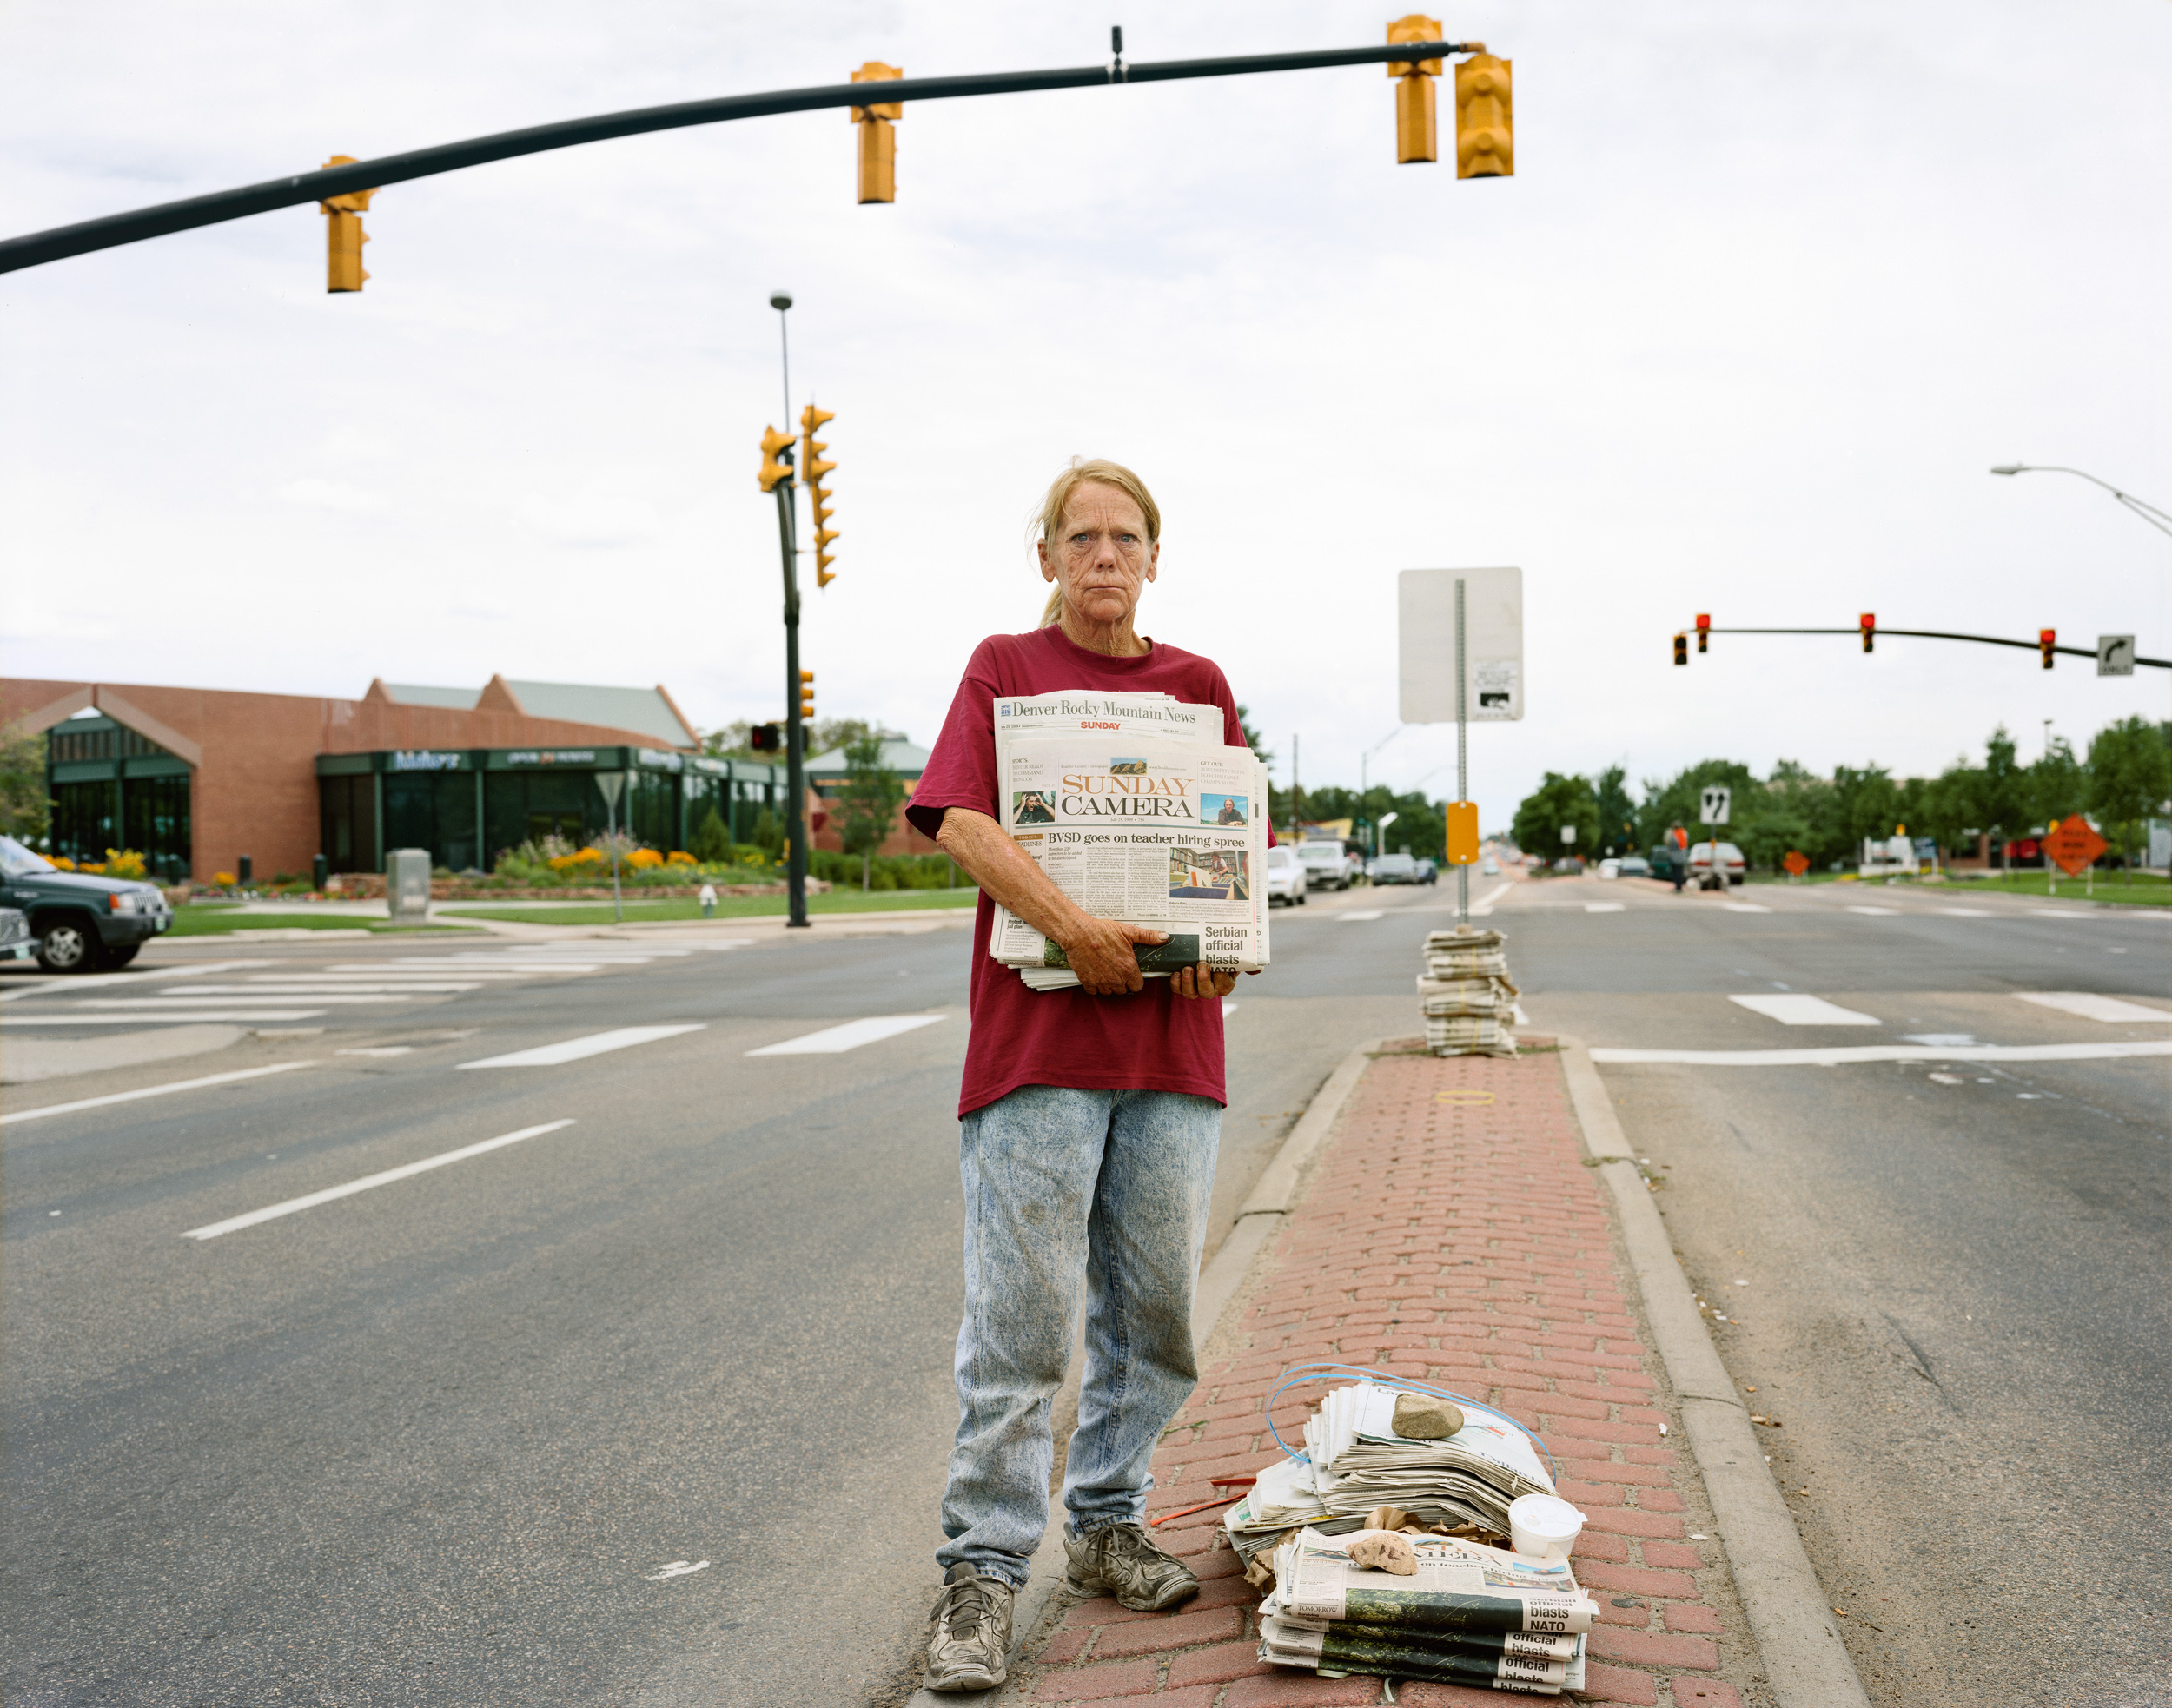 A Woman Selling the Sunday Papers, Boulder, Colorado, July 1999